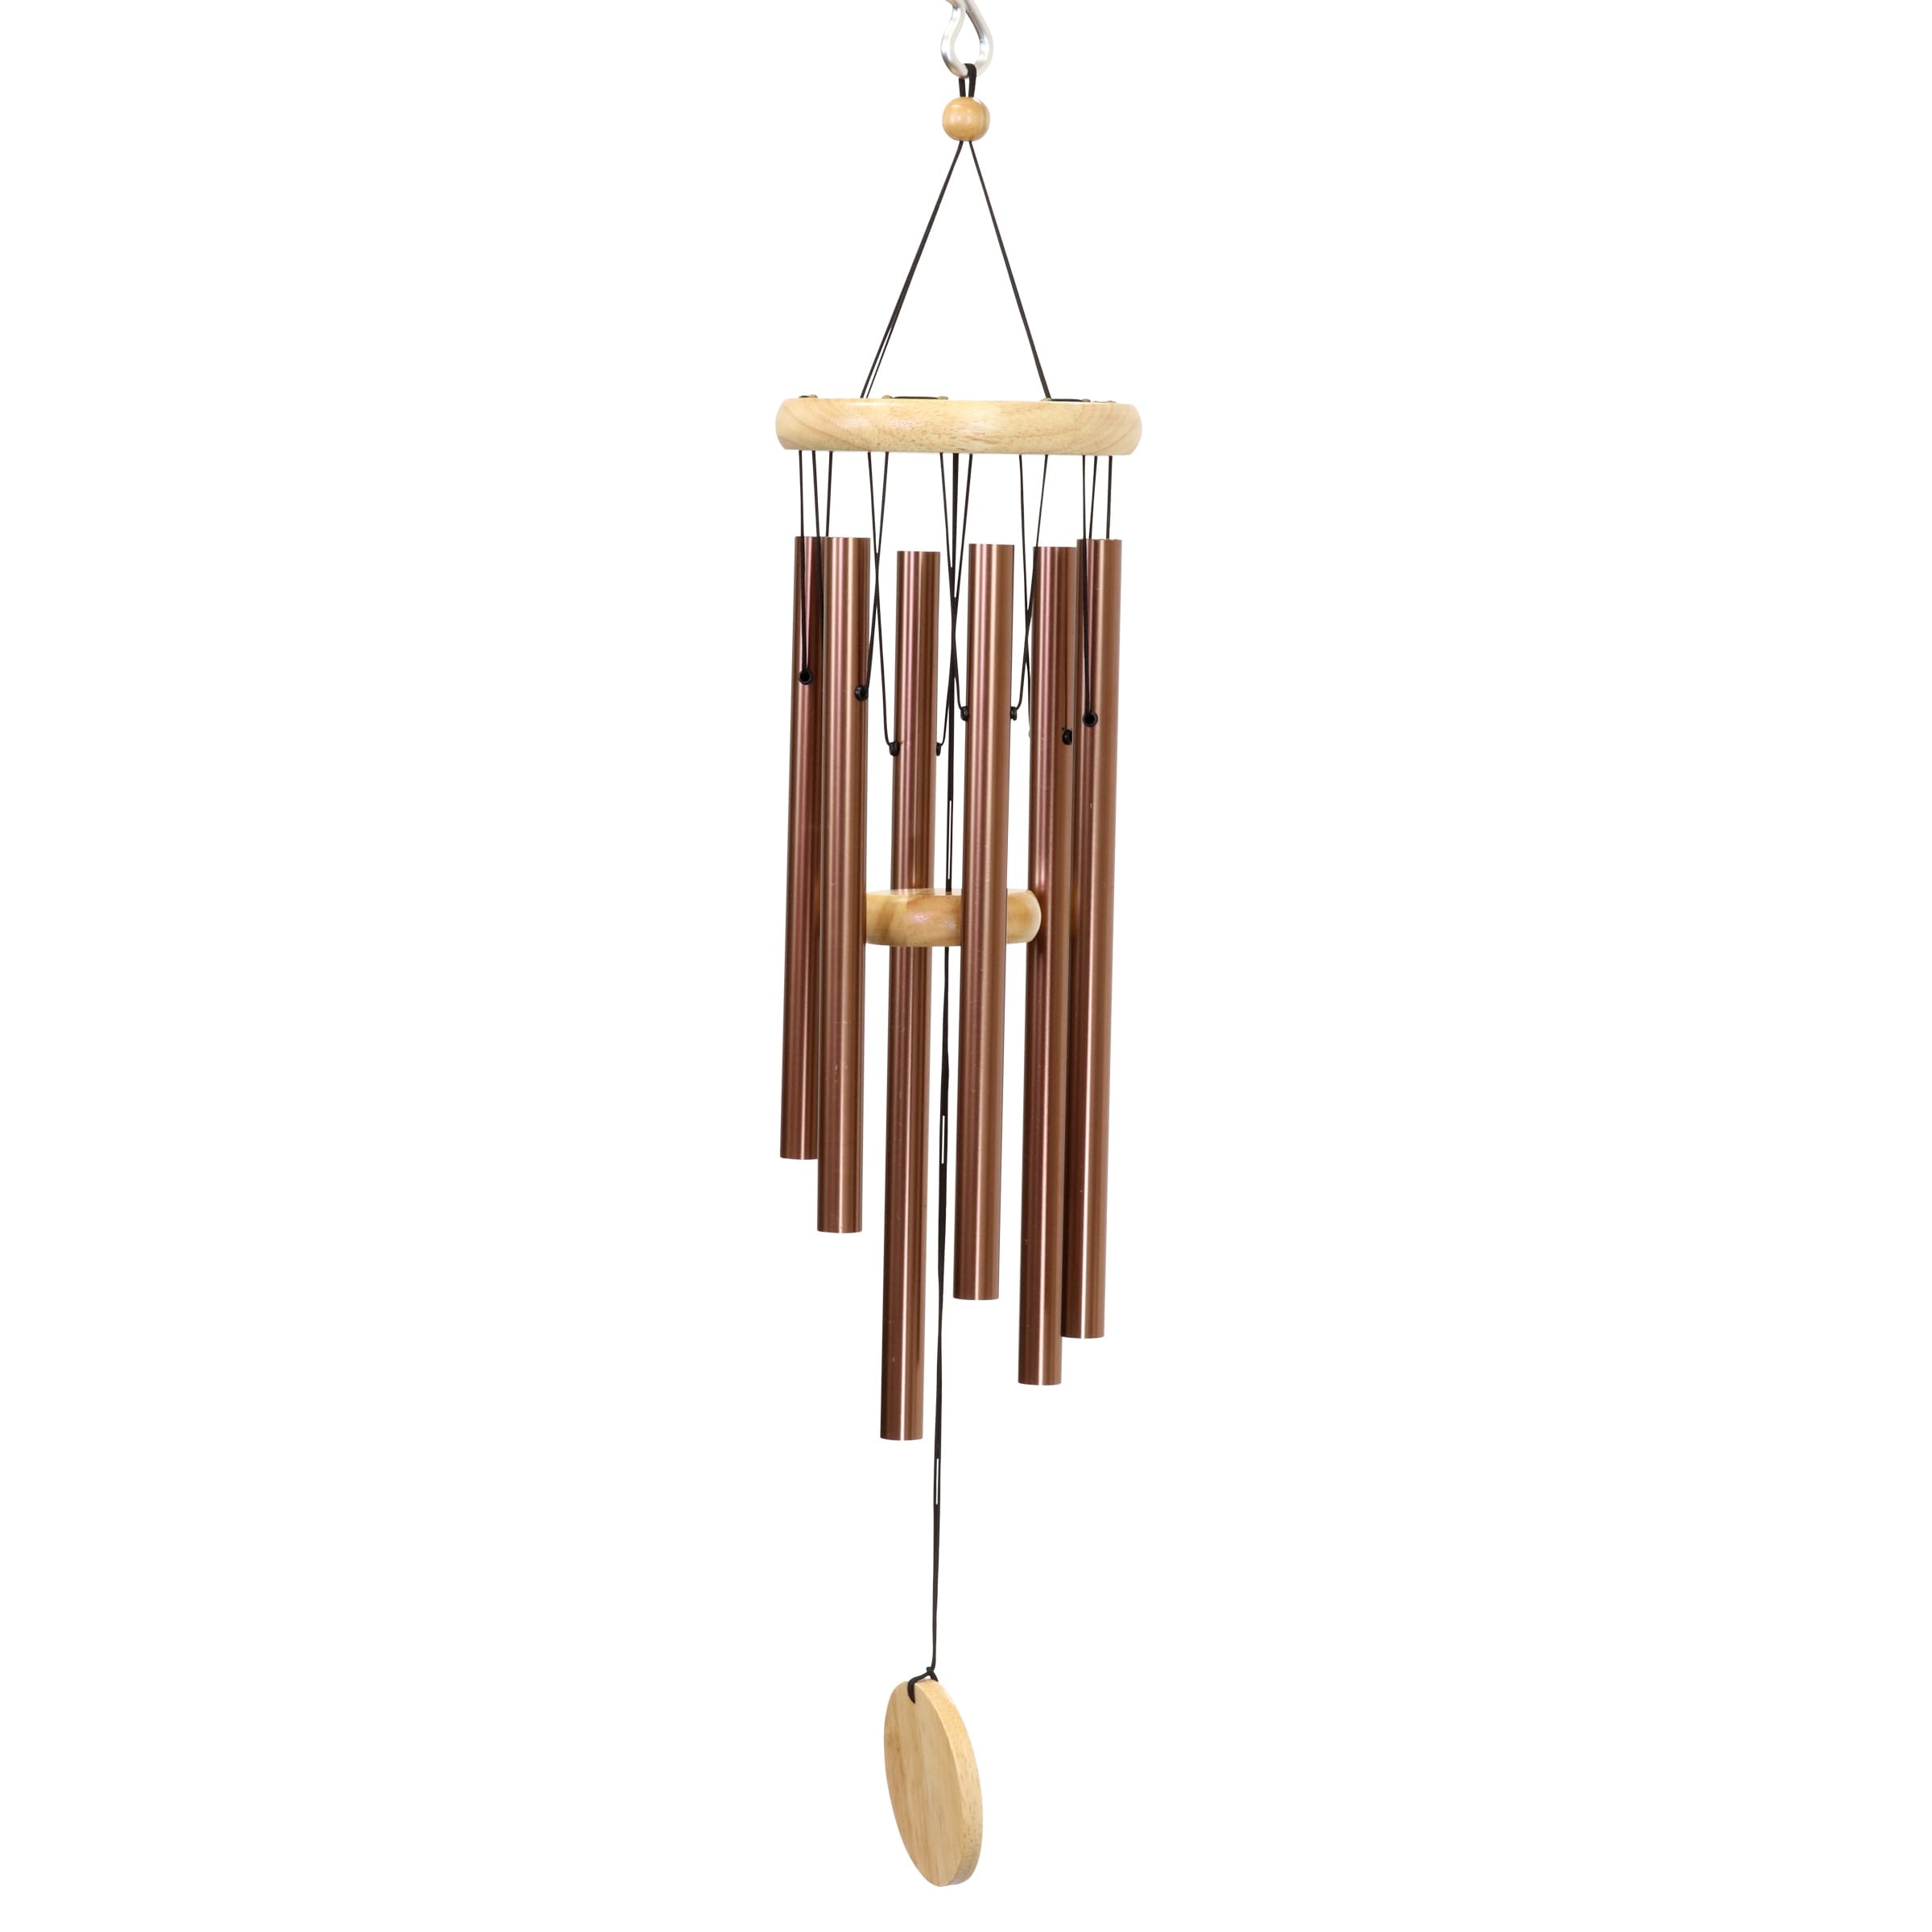 Exhart 30-in Natural Metal Angel Chime Wind Chime Brand New in Original Box! 